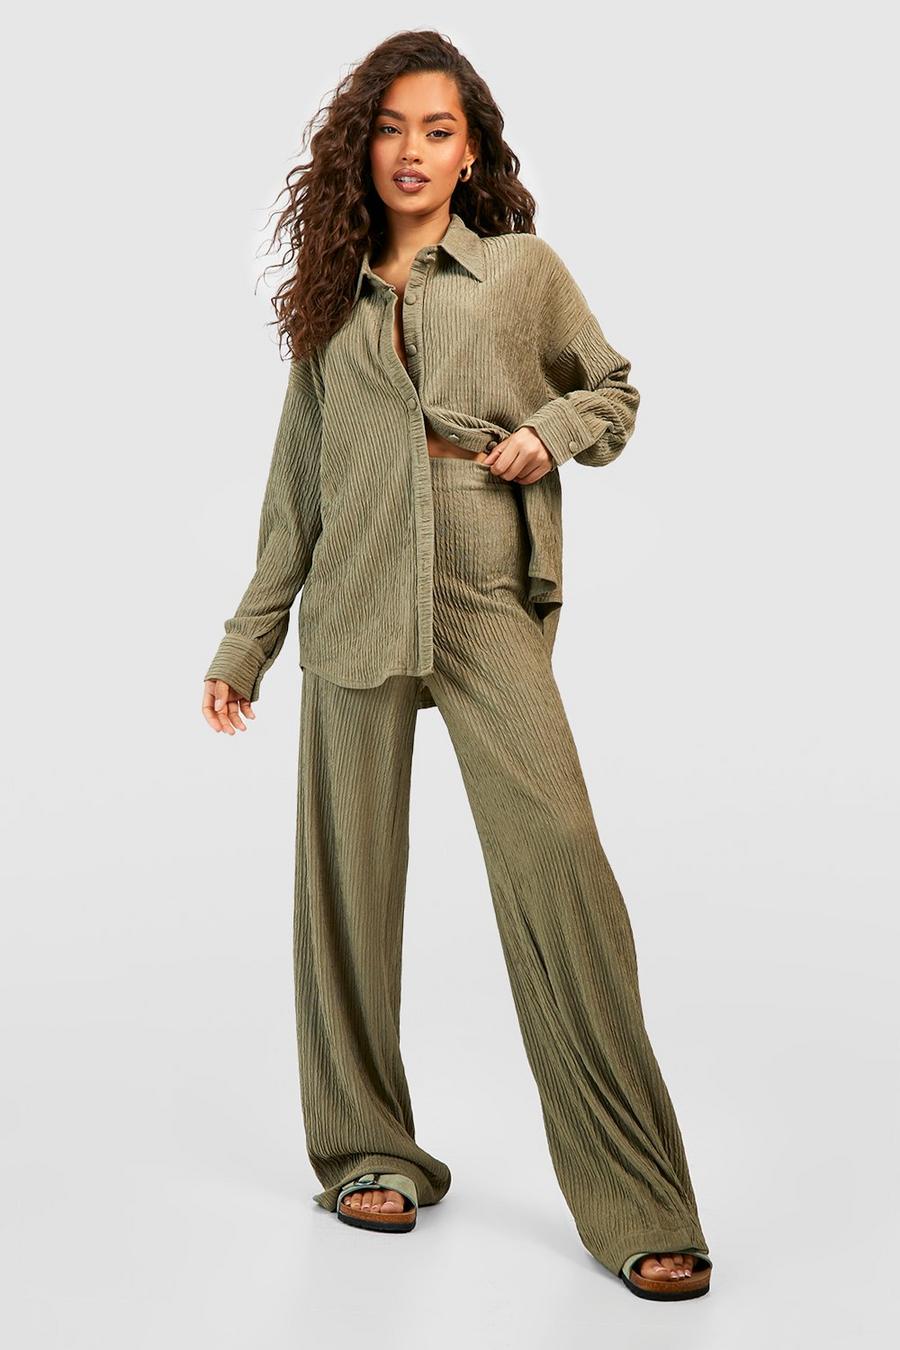 Khaki Crinkle Relaxed Fit Wide Leg Pants